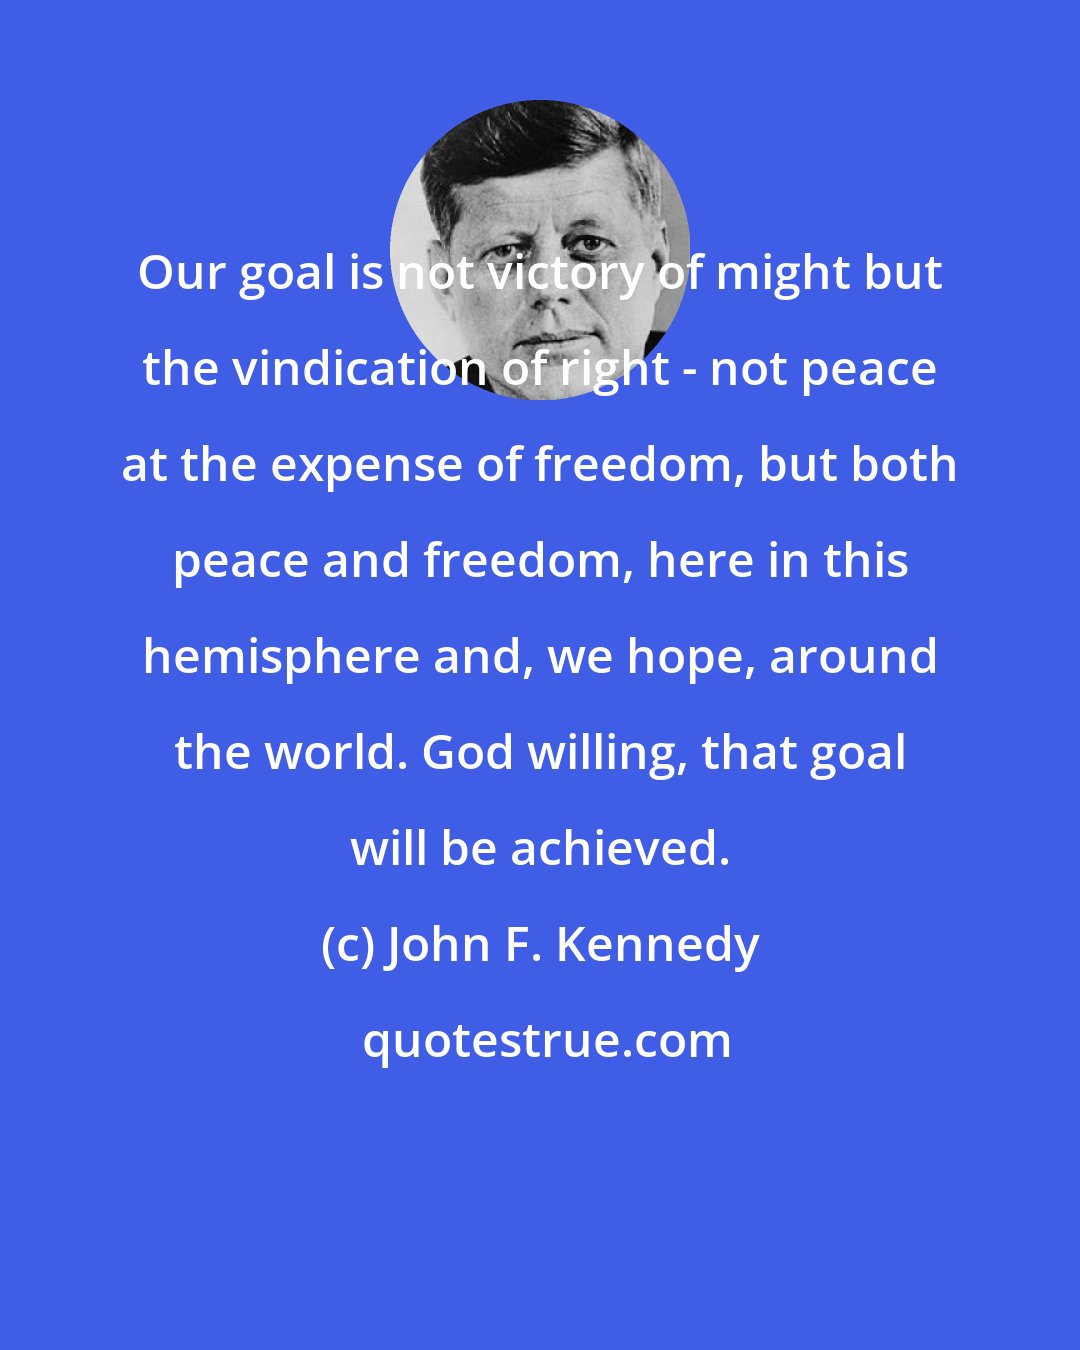 John F. Kennedy: Our goal is not victory of might but the vindication of right - not peace at the expense of freedom, but both peace and freedom, here in this hemisphere and, we hope, around the world. God willing, that goal will be achieved.